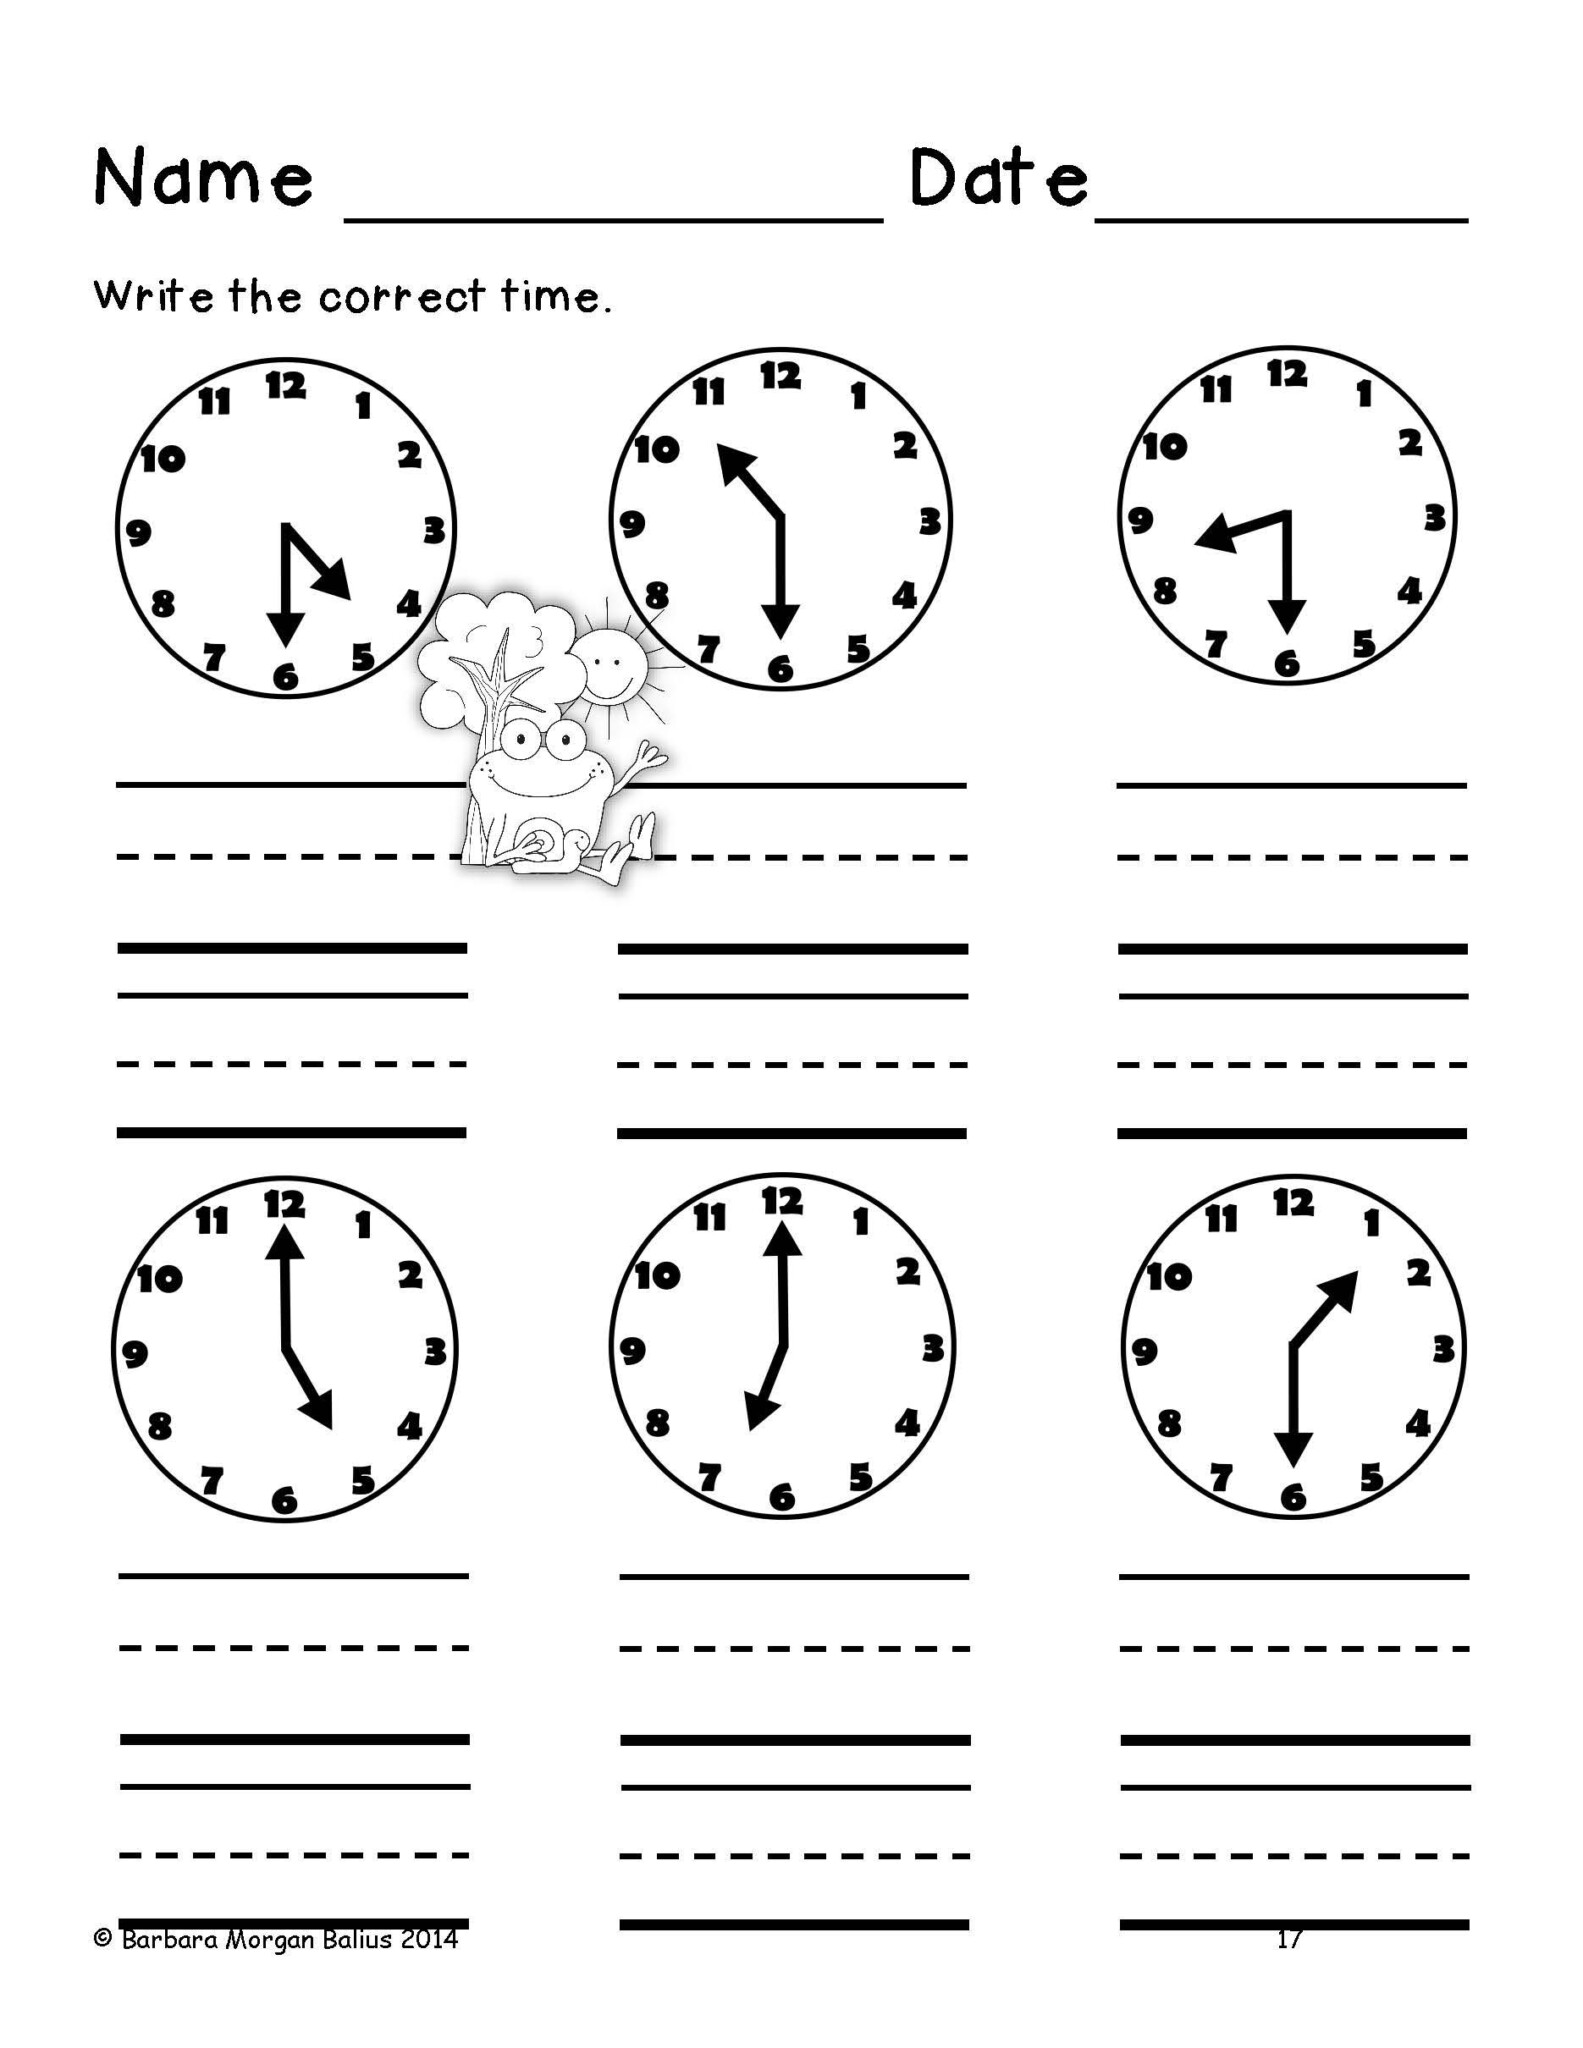 counting-money-telling-time-worksheets-digital-first-grade-math